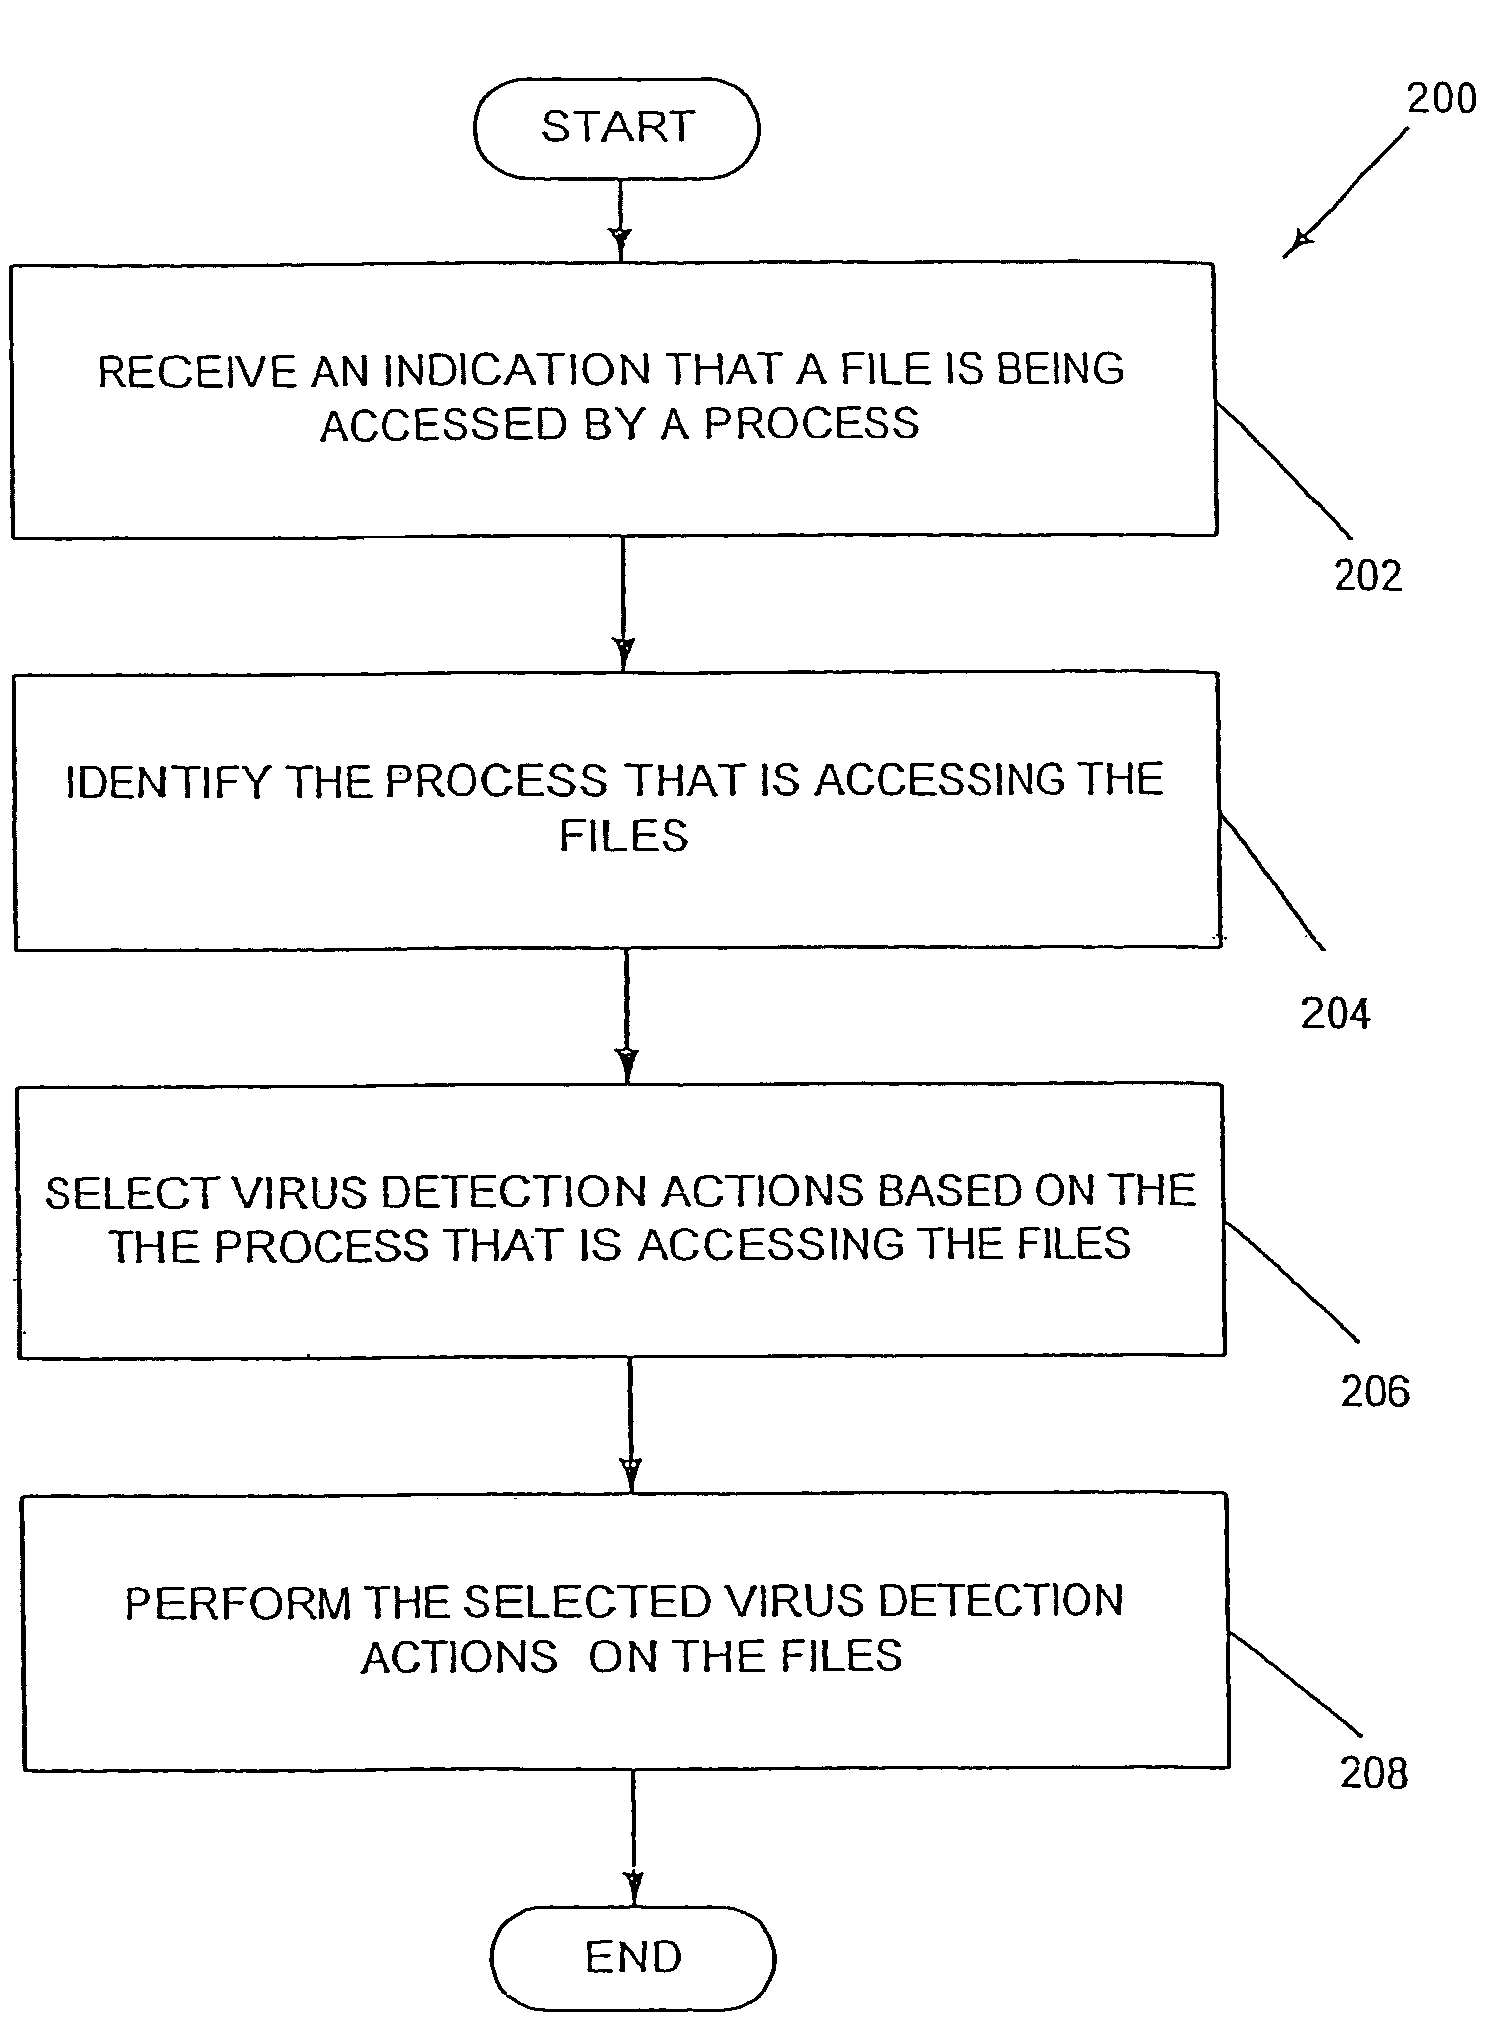 Process-based selection of virus detection actions system, method and computer program product